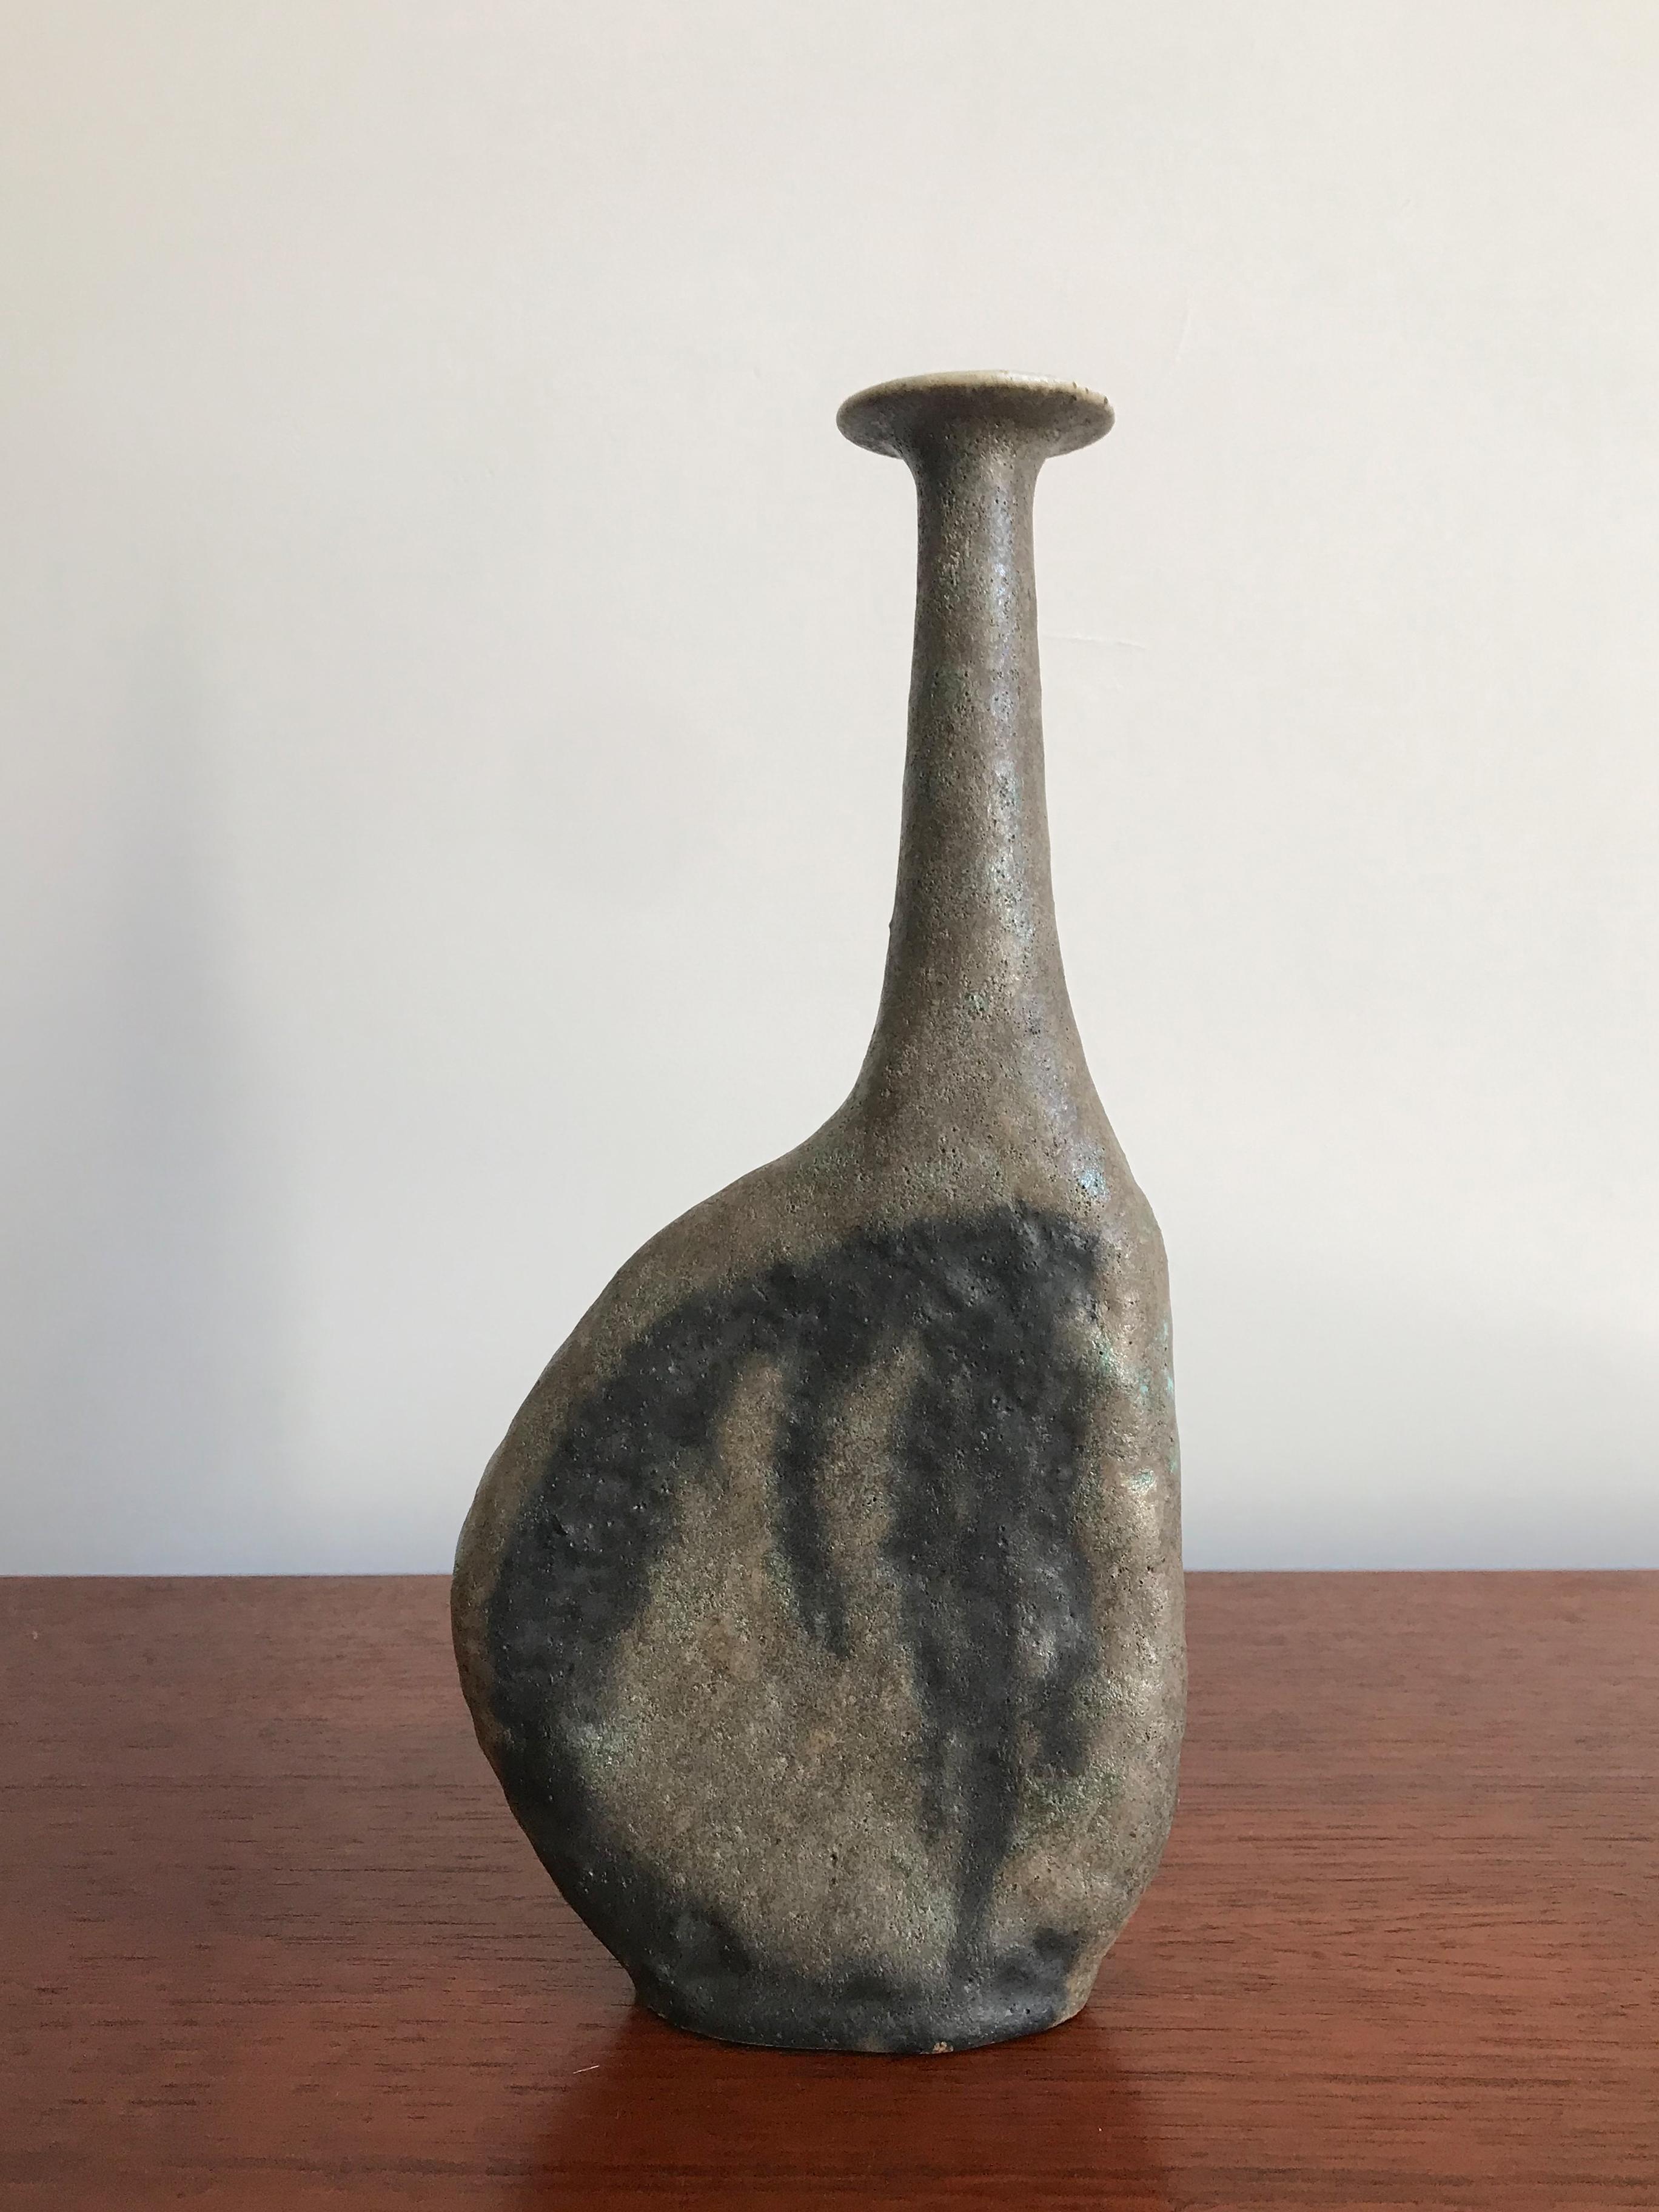 Midcentury ceramic vase designed and made by the Italian artist Bruno Gambone in the 60s.